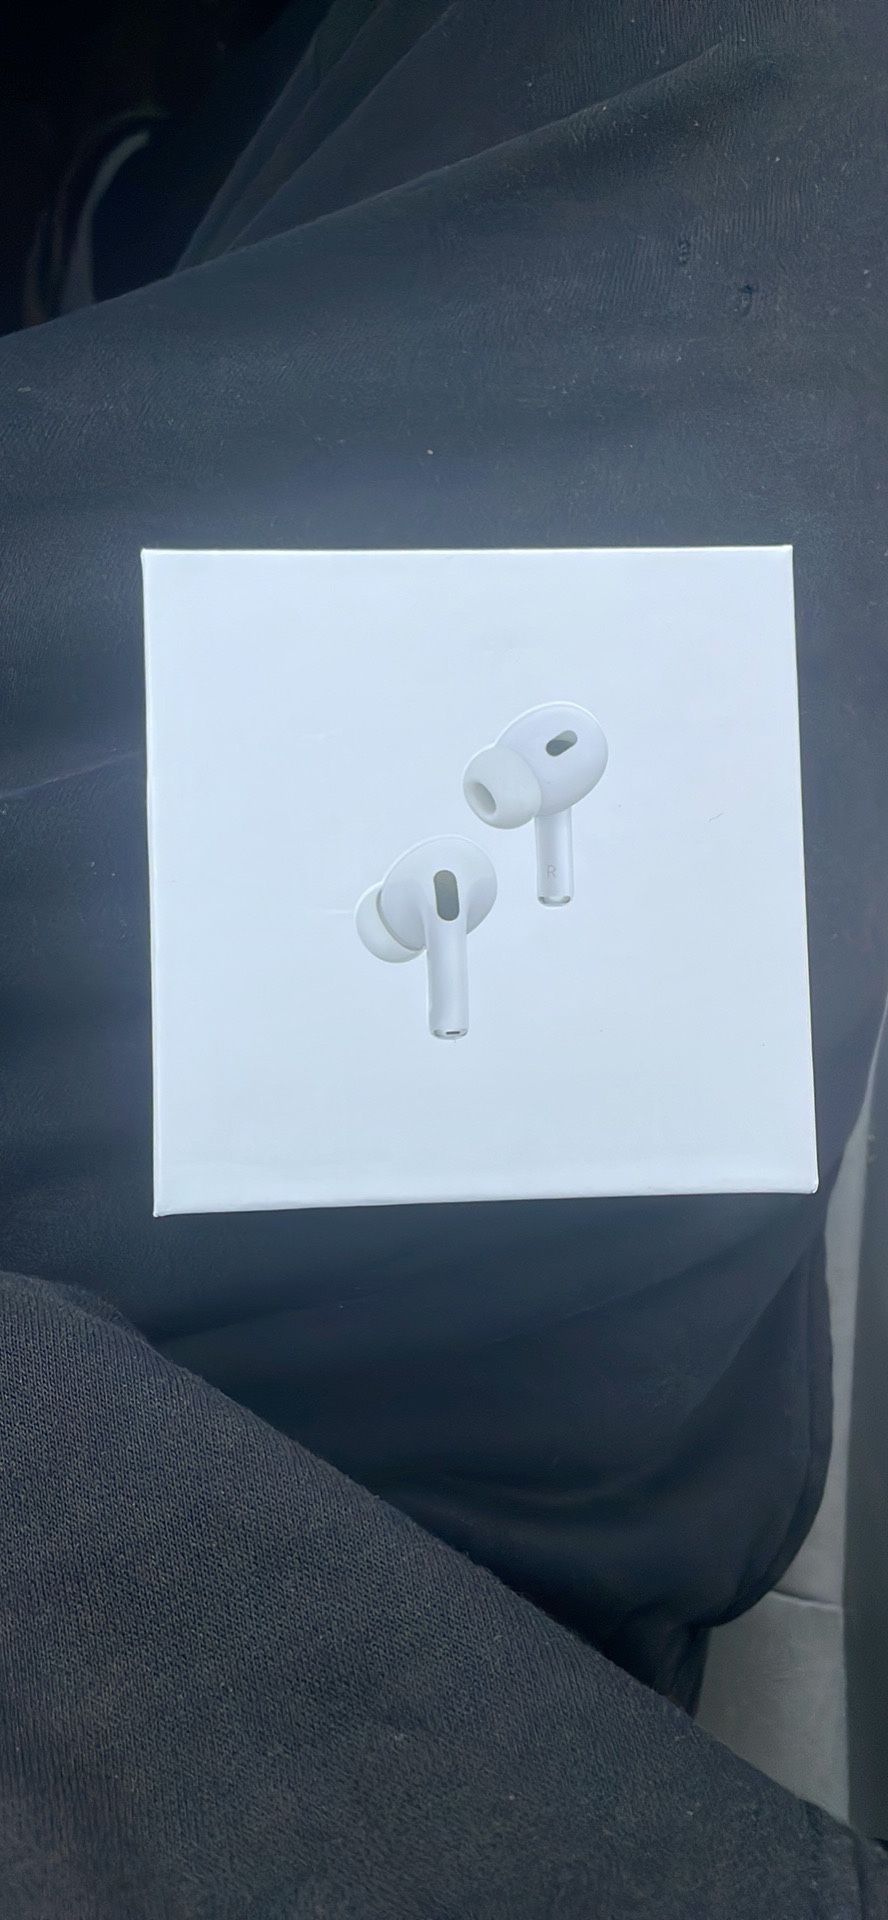 AirPods Pro 2nd Generation’s 